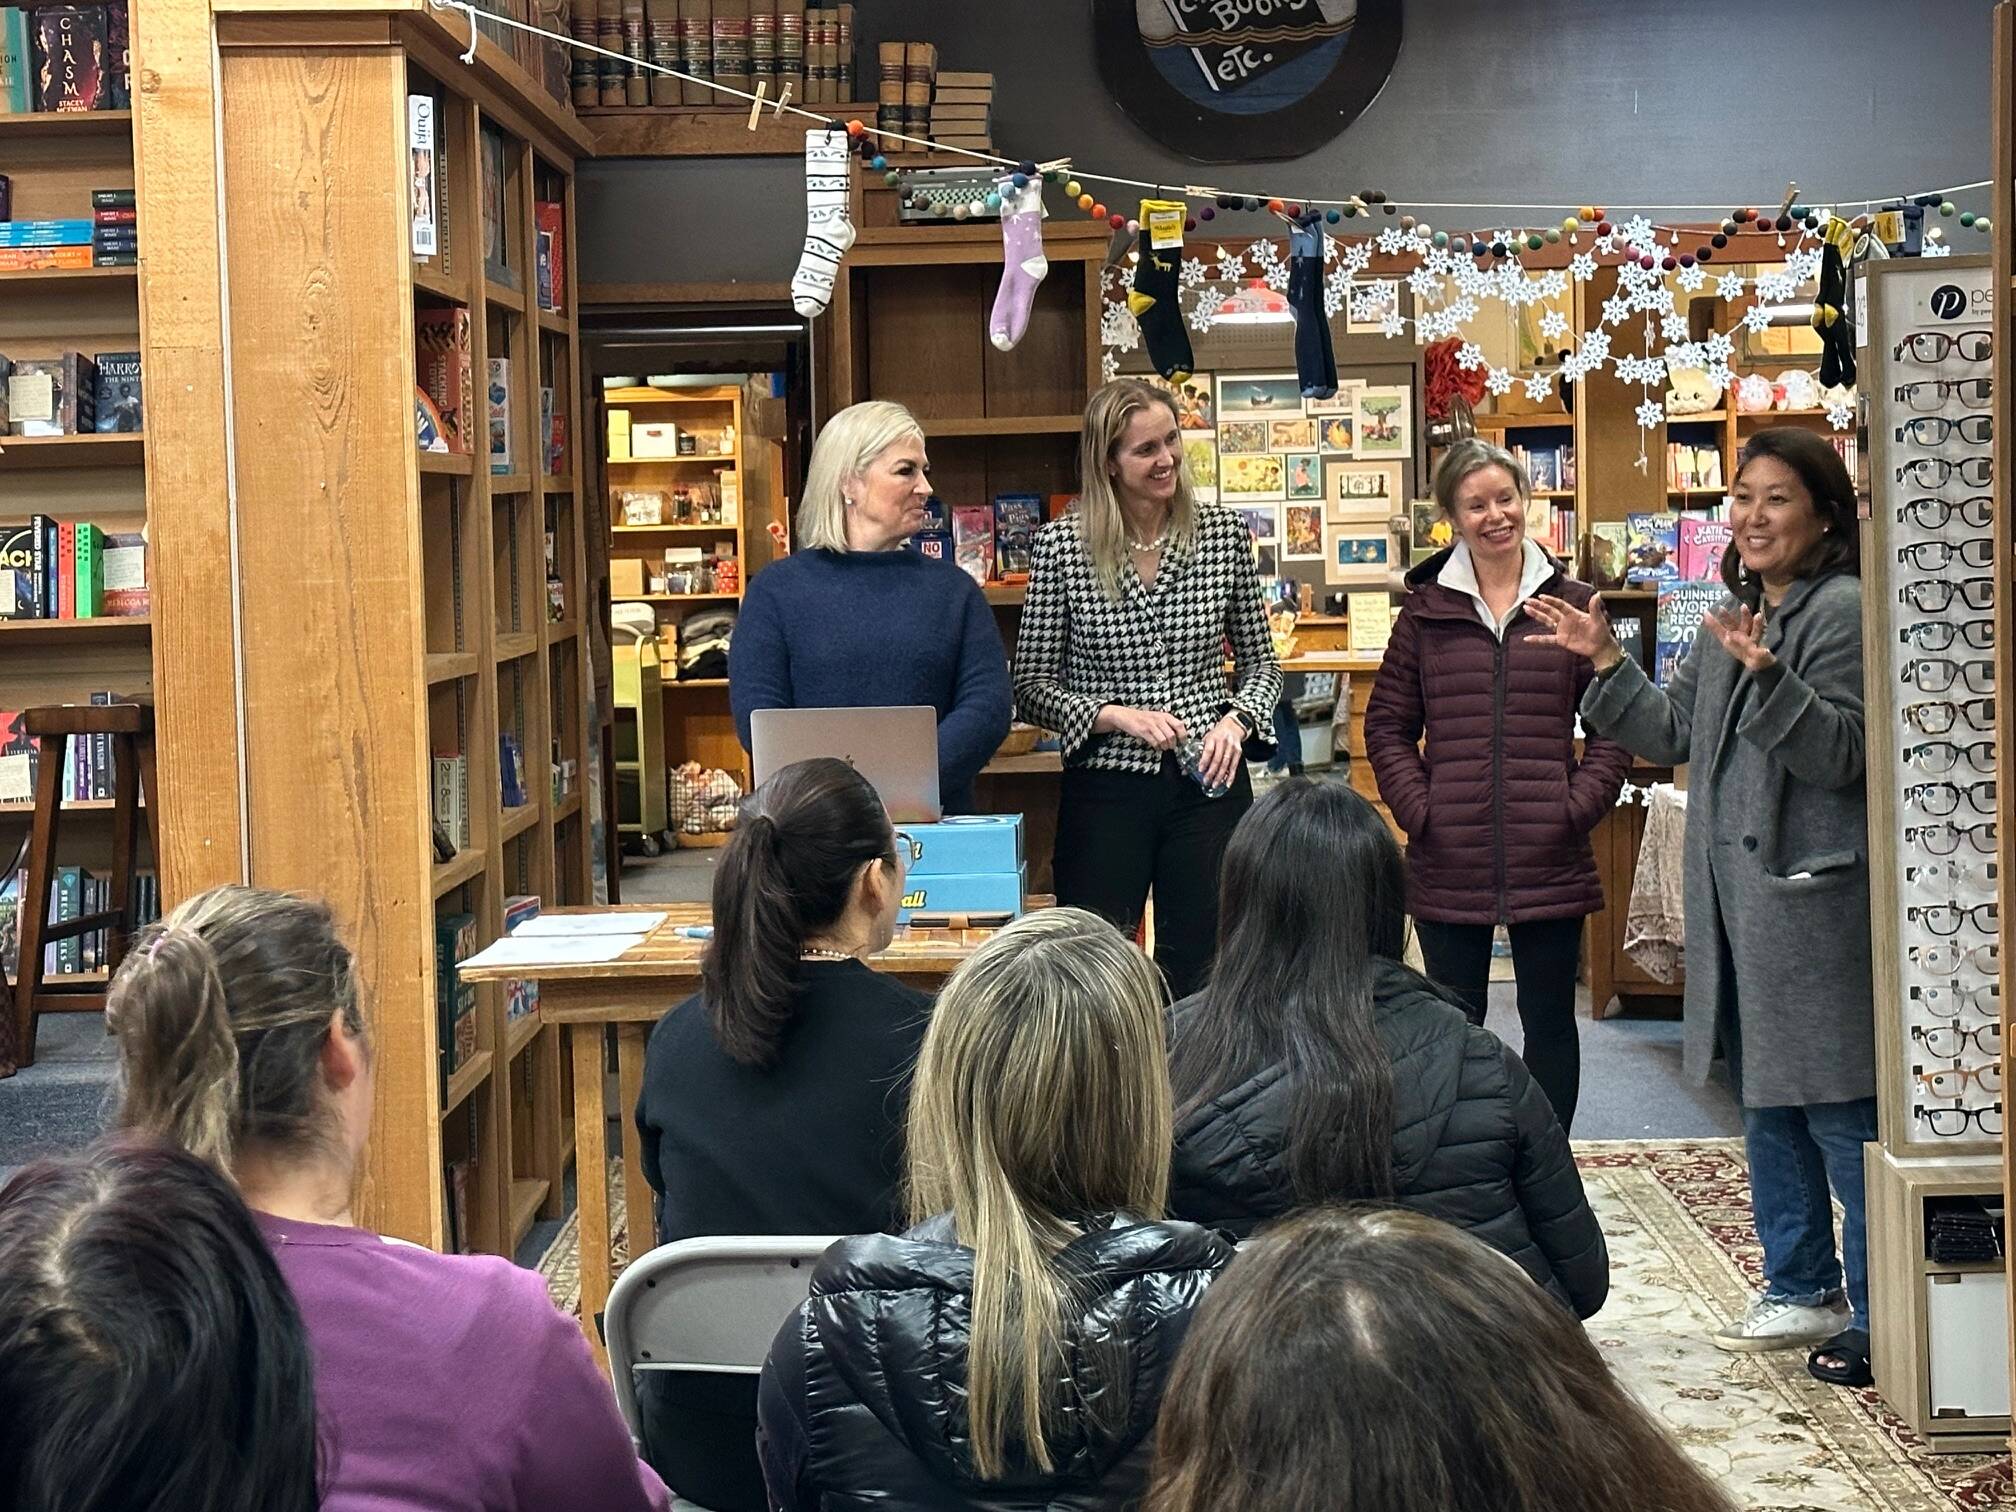 From left, Mercer Islanders Robyn Baron, Stacey Thornton, Anna Becker and Robyn Kimura Hsu discuss the National Charity League on Jan. 16 at Island Books. Photo courtesy of Poppy MacDonald